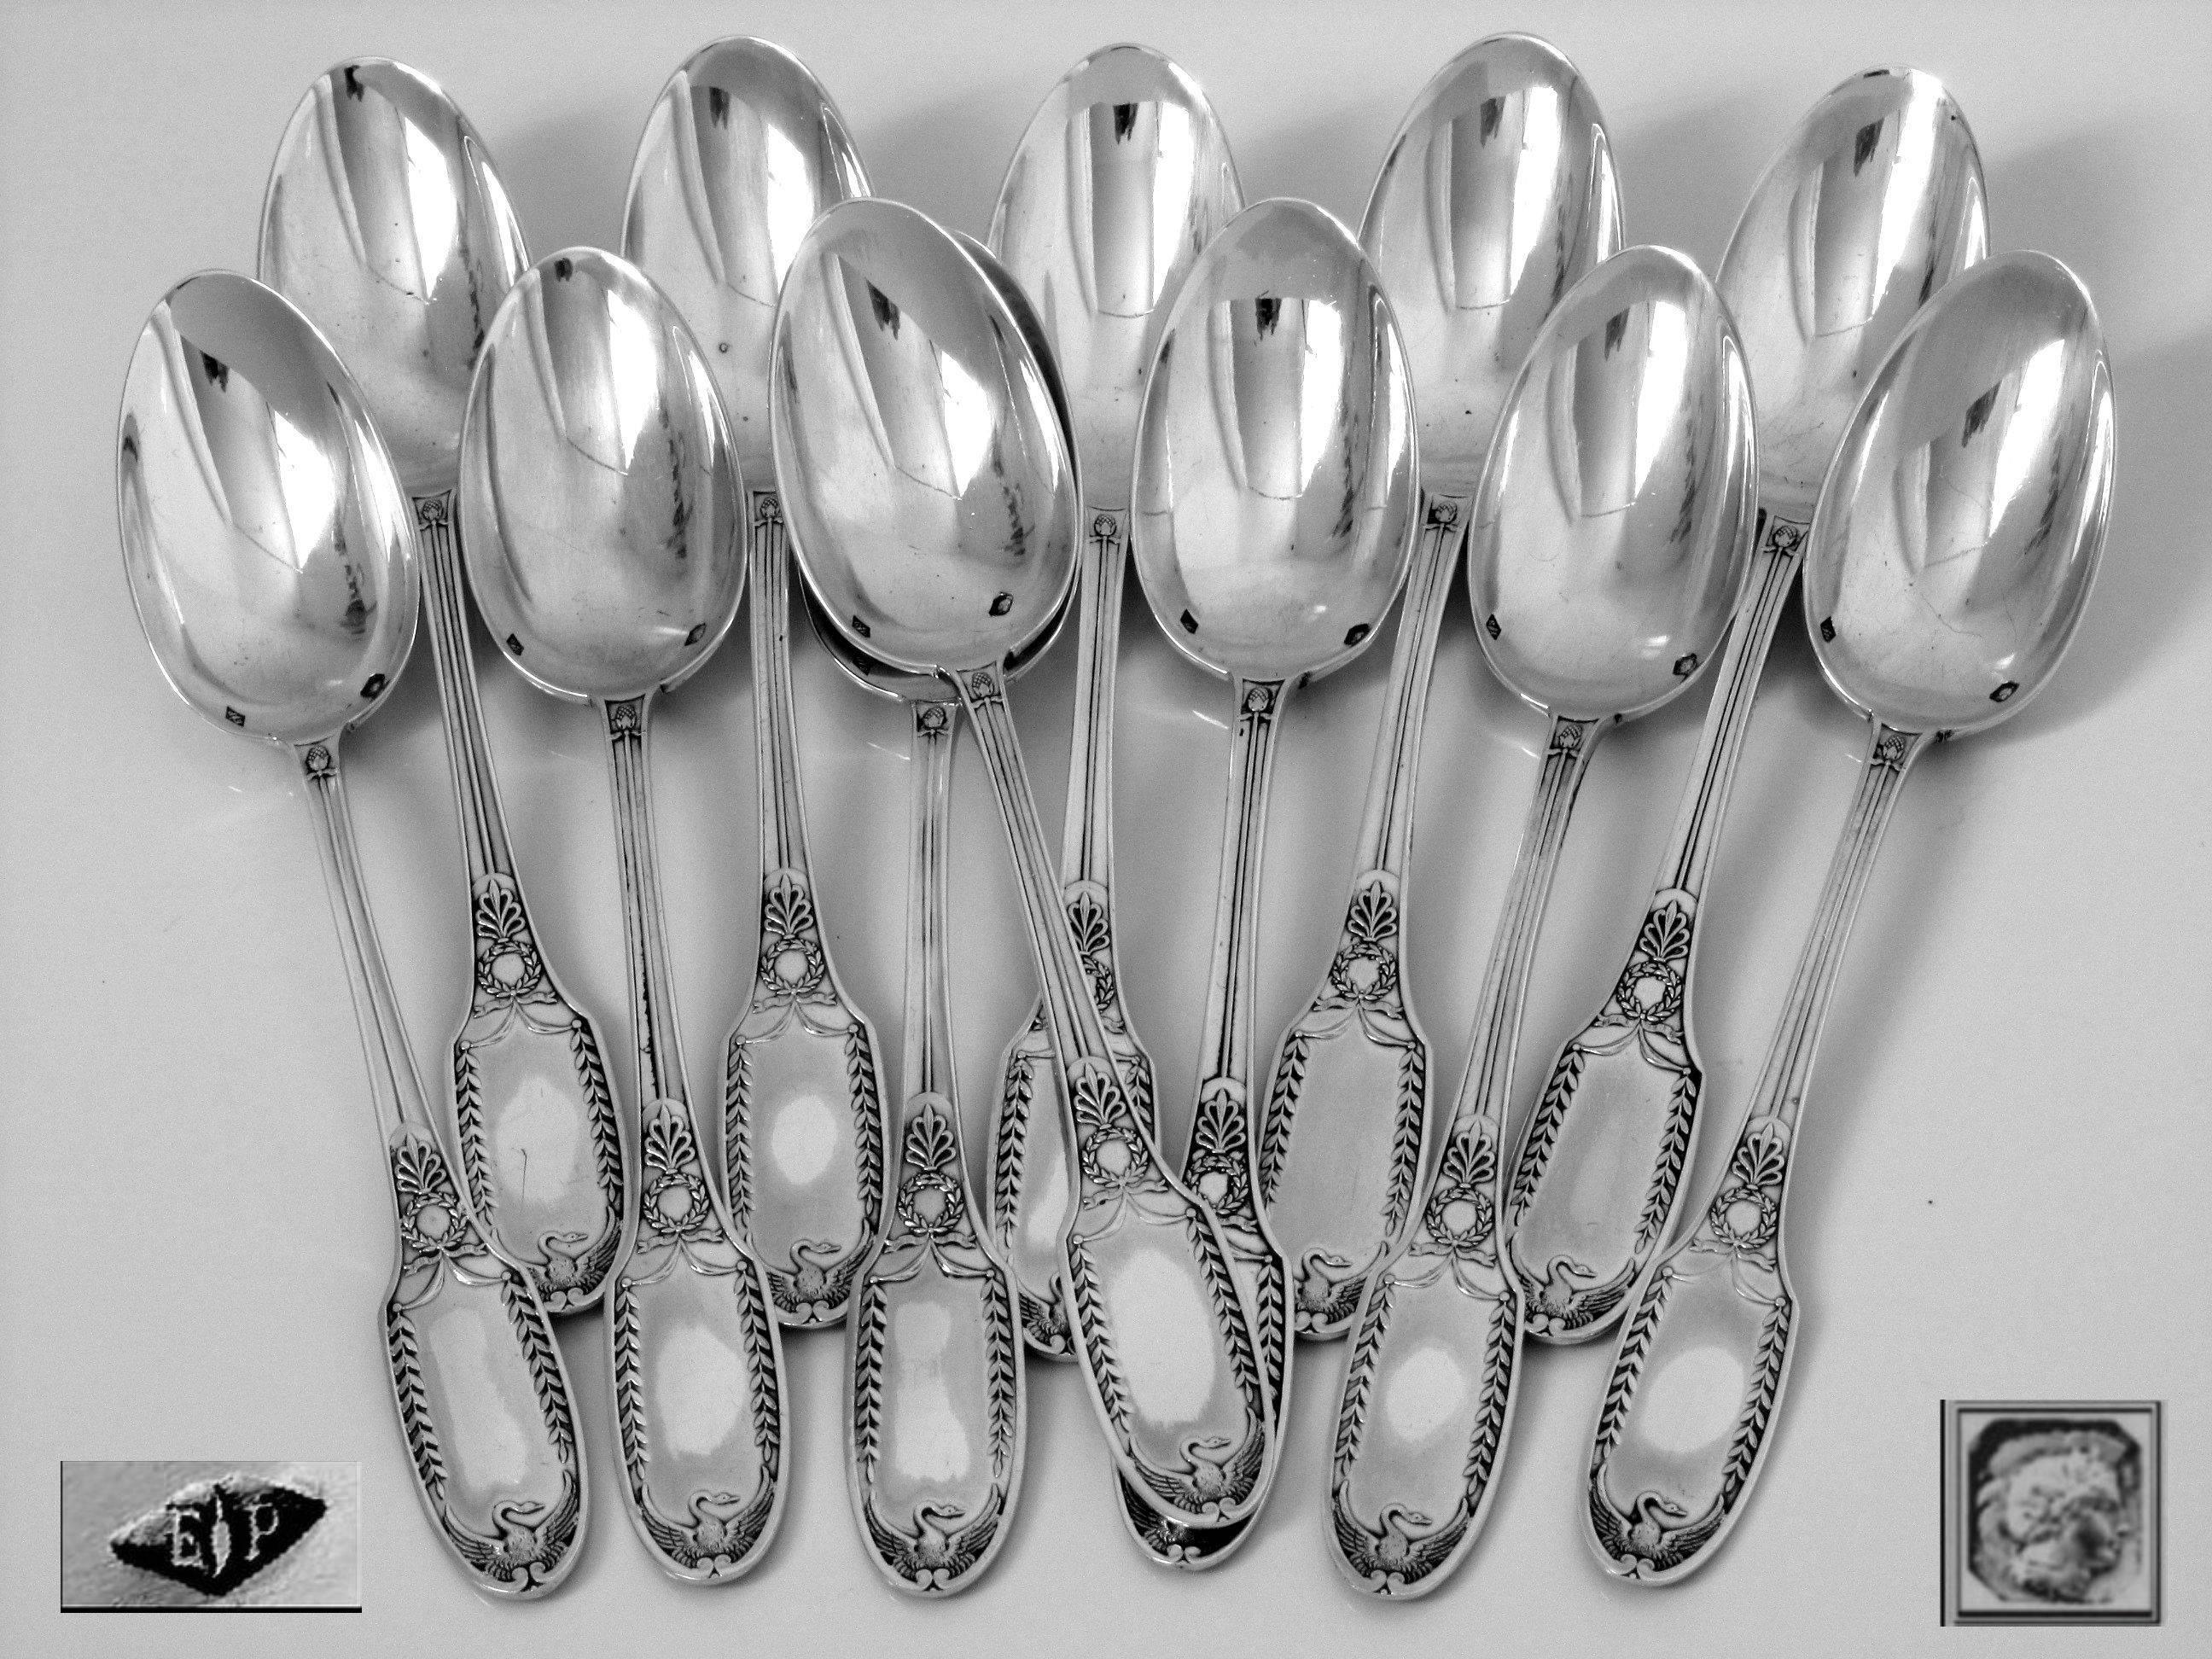 Women's or Men's Puiforcat Rare French Sterling Silver Tea or Coffee Spoons Set 12 pc box Swans